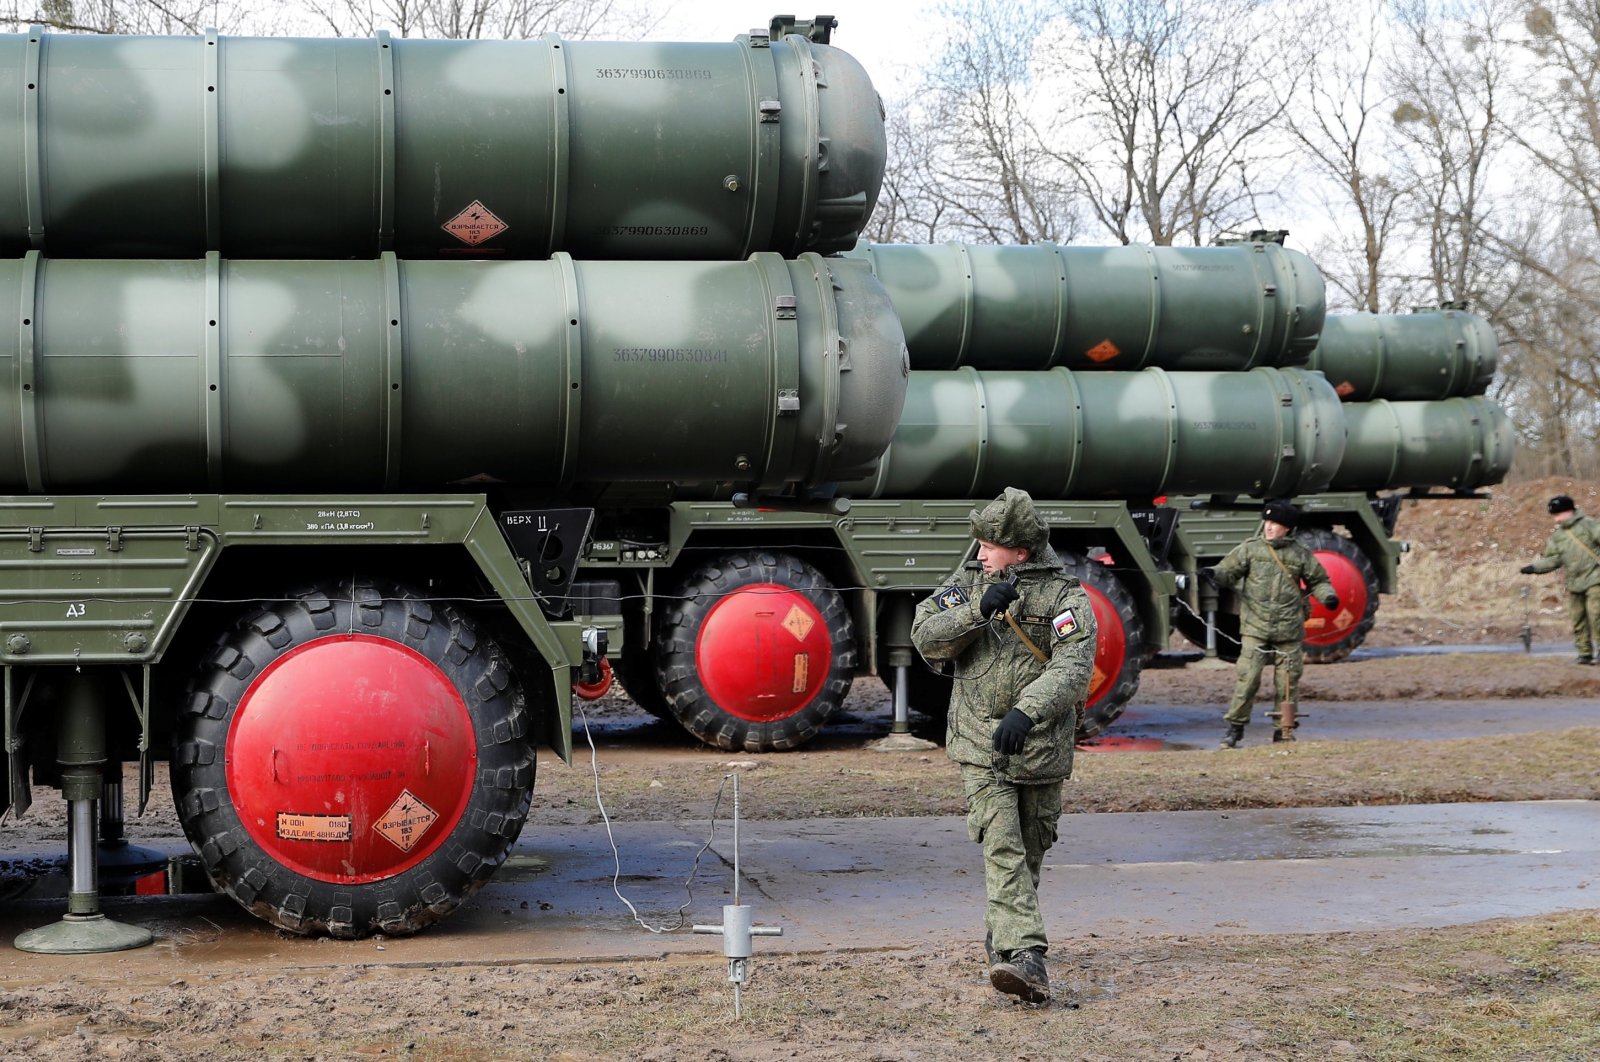 Russian officers stand next to a new S-400 surface-to-air missile system after its deployment at a military base outside the town of Gvardeysk near Kaliningrad, Russia, March 11, 2019. (Reuters Photo)